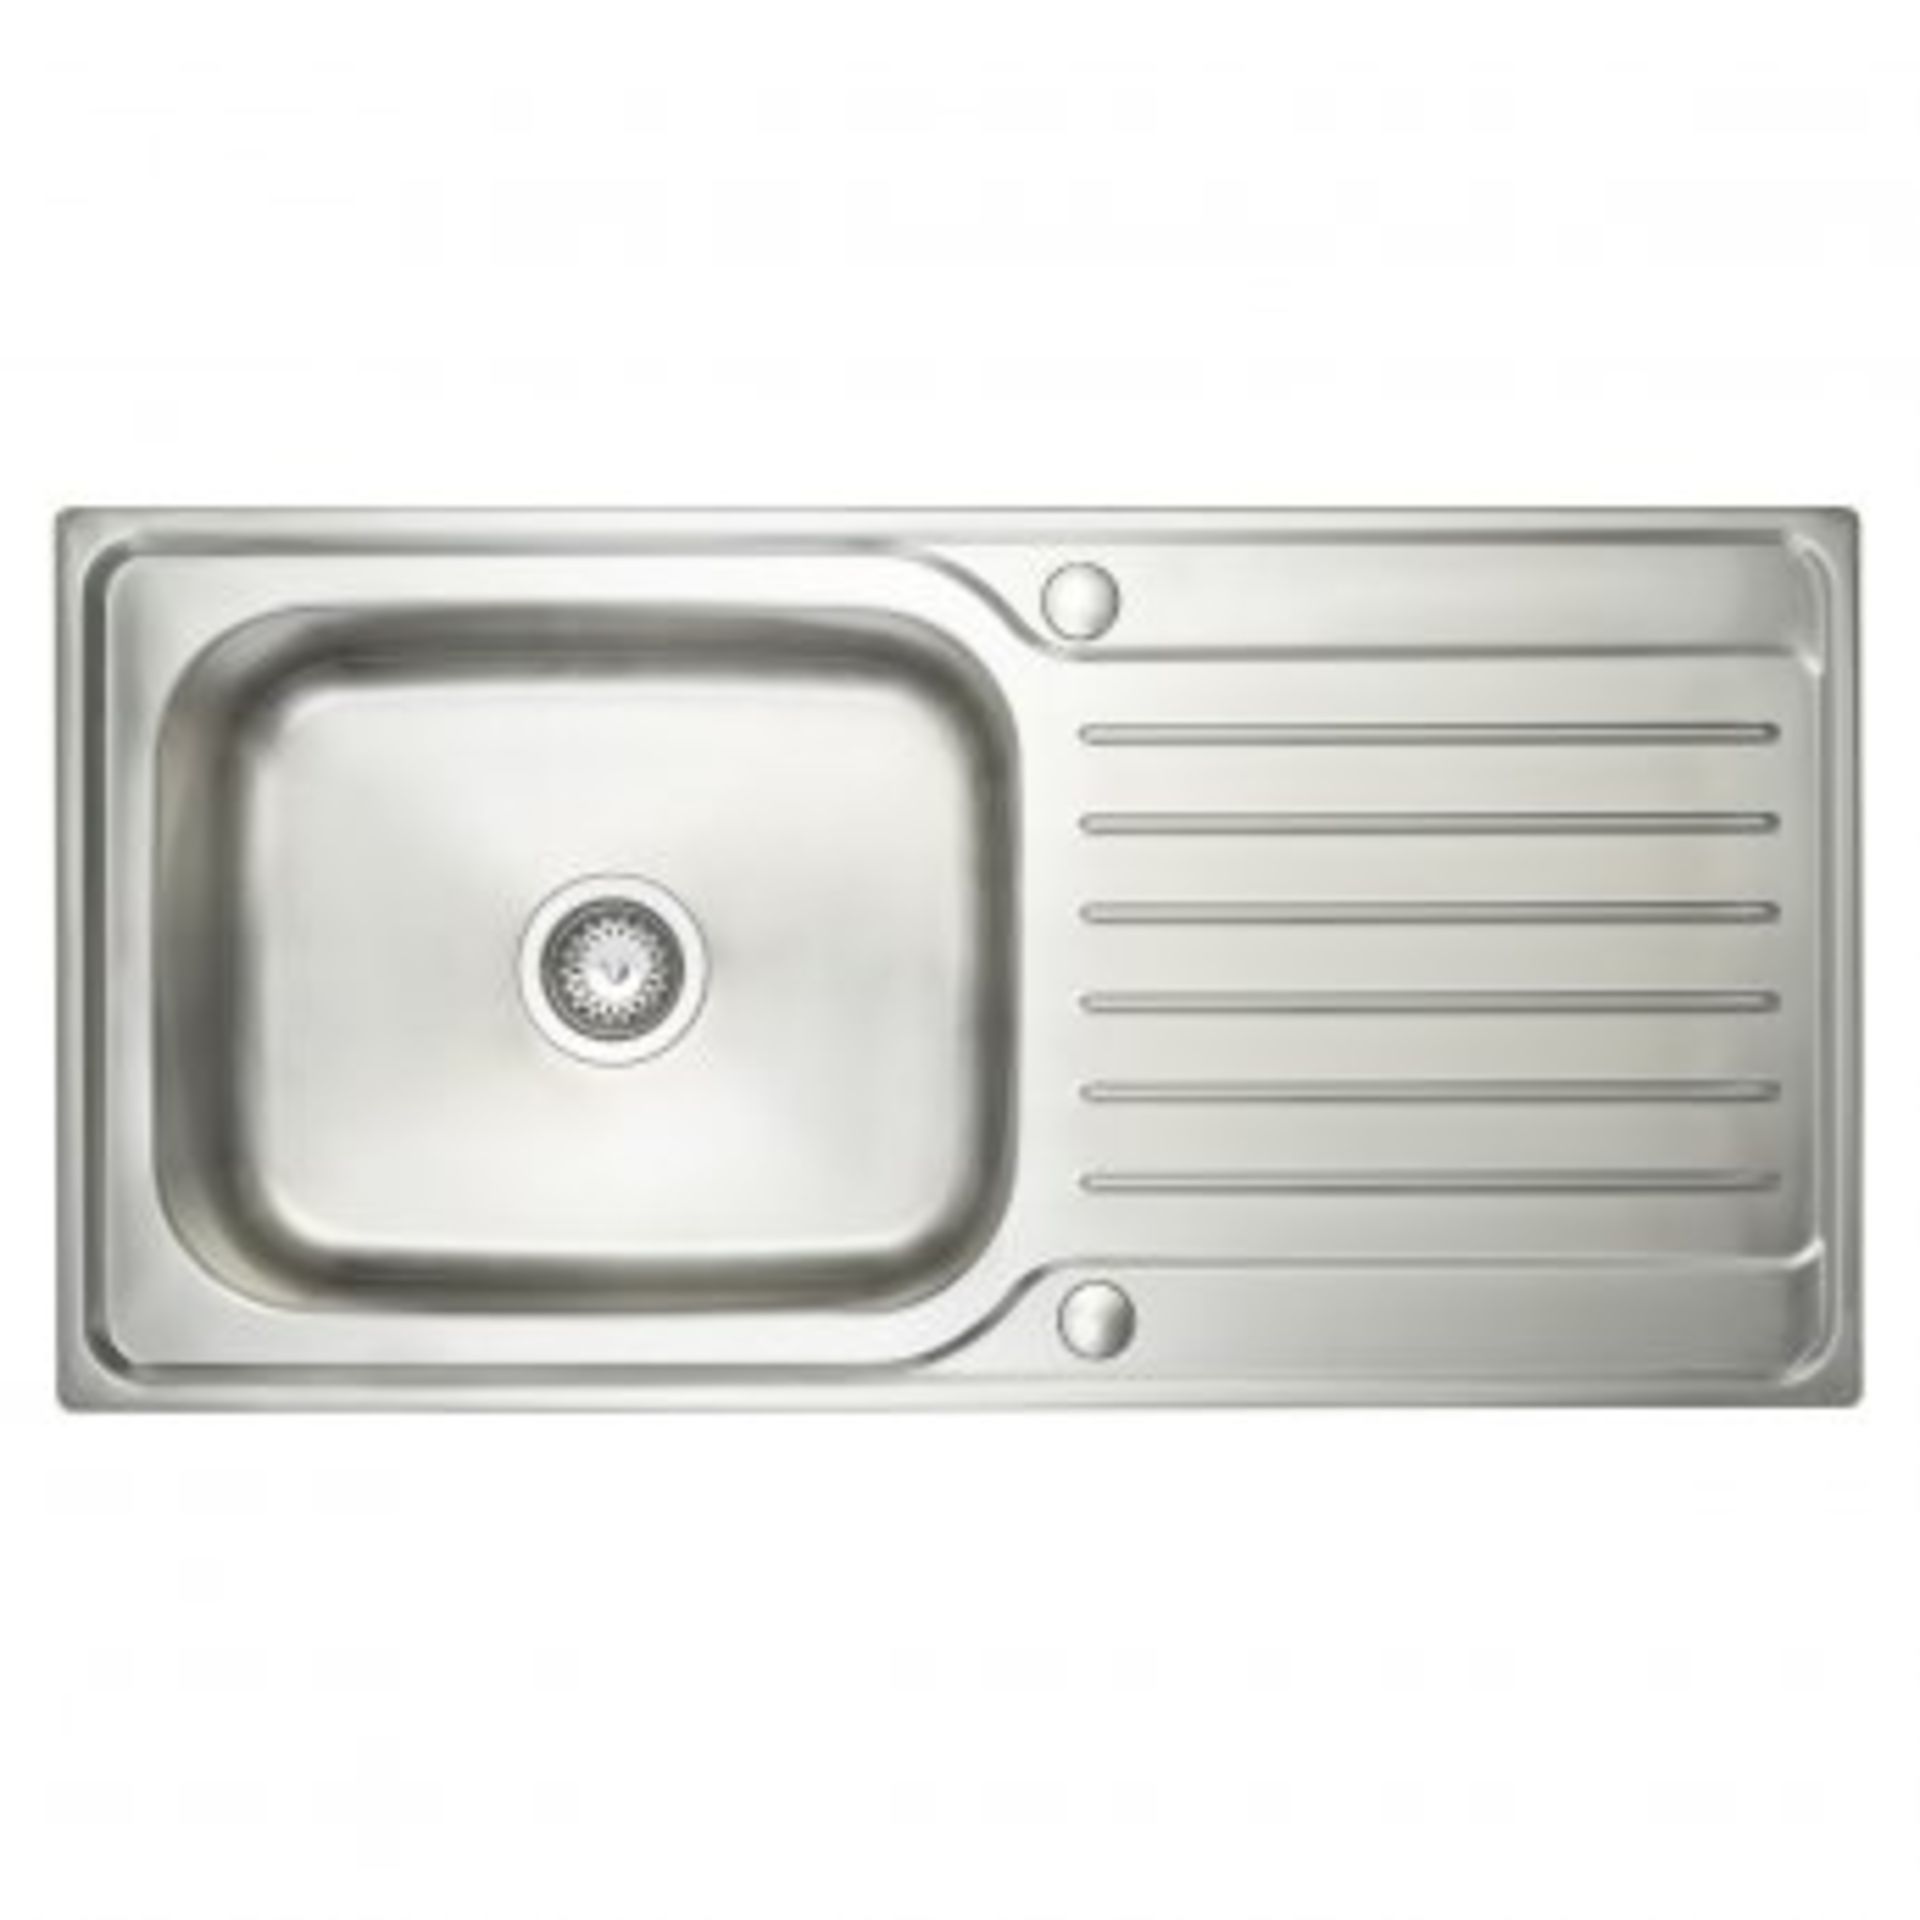 New (G69) Signature Prima Deep 1.0 Bowl Kitchen Sink With Waste Kit 1000 L x 500 W - - Image 2 of 2